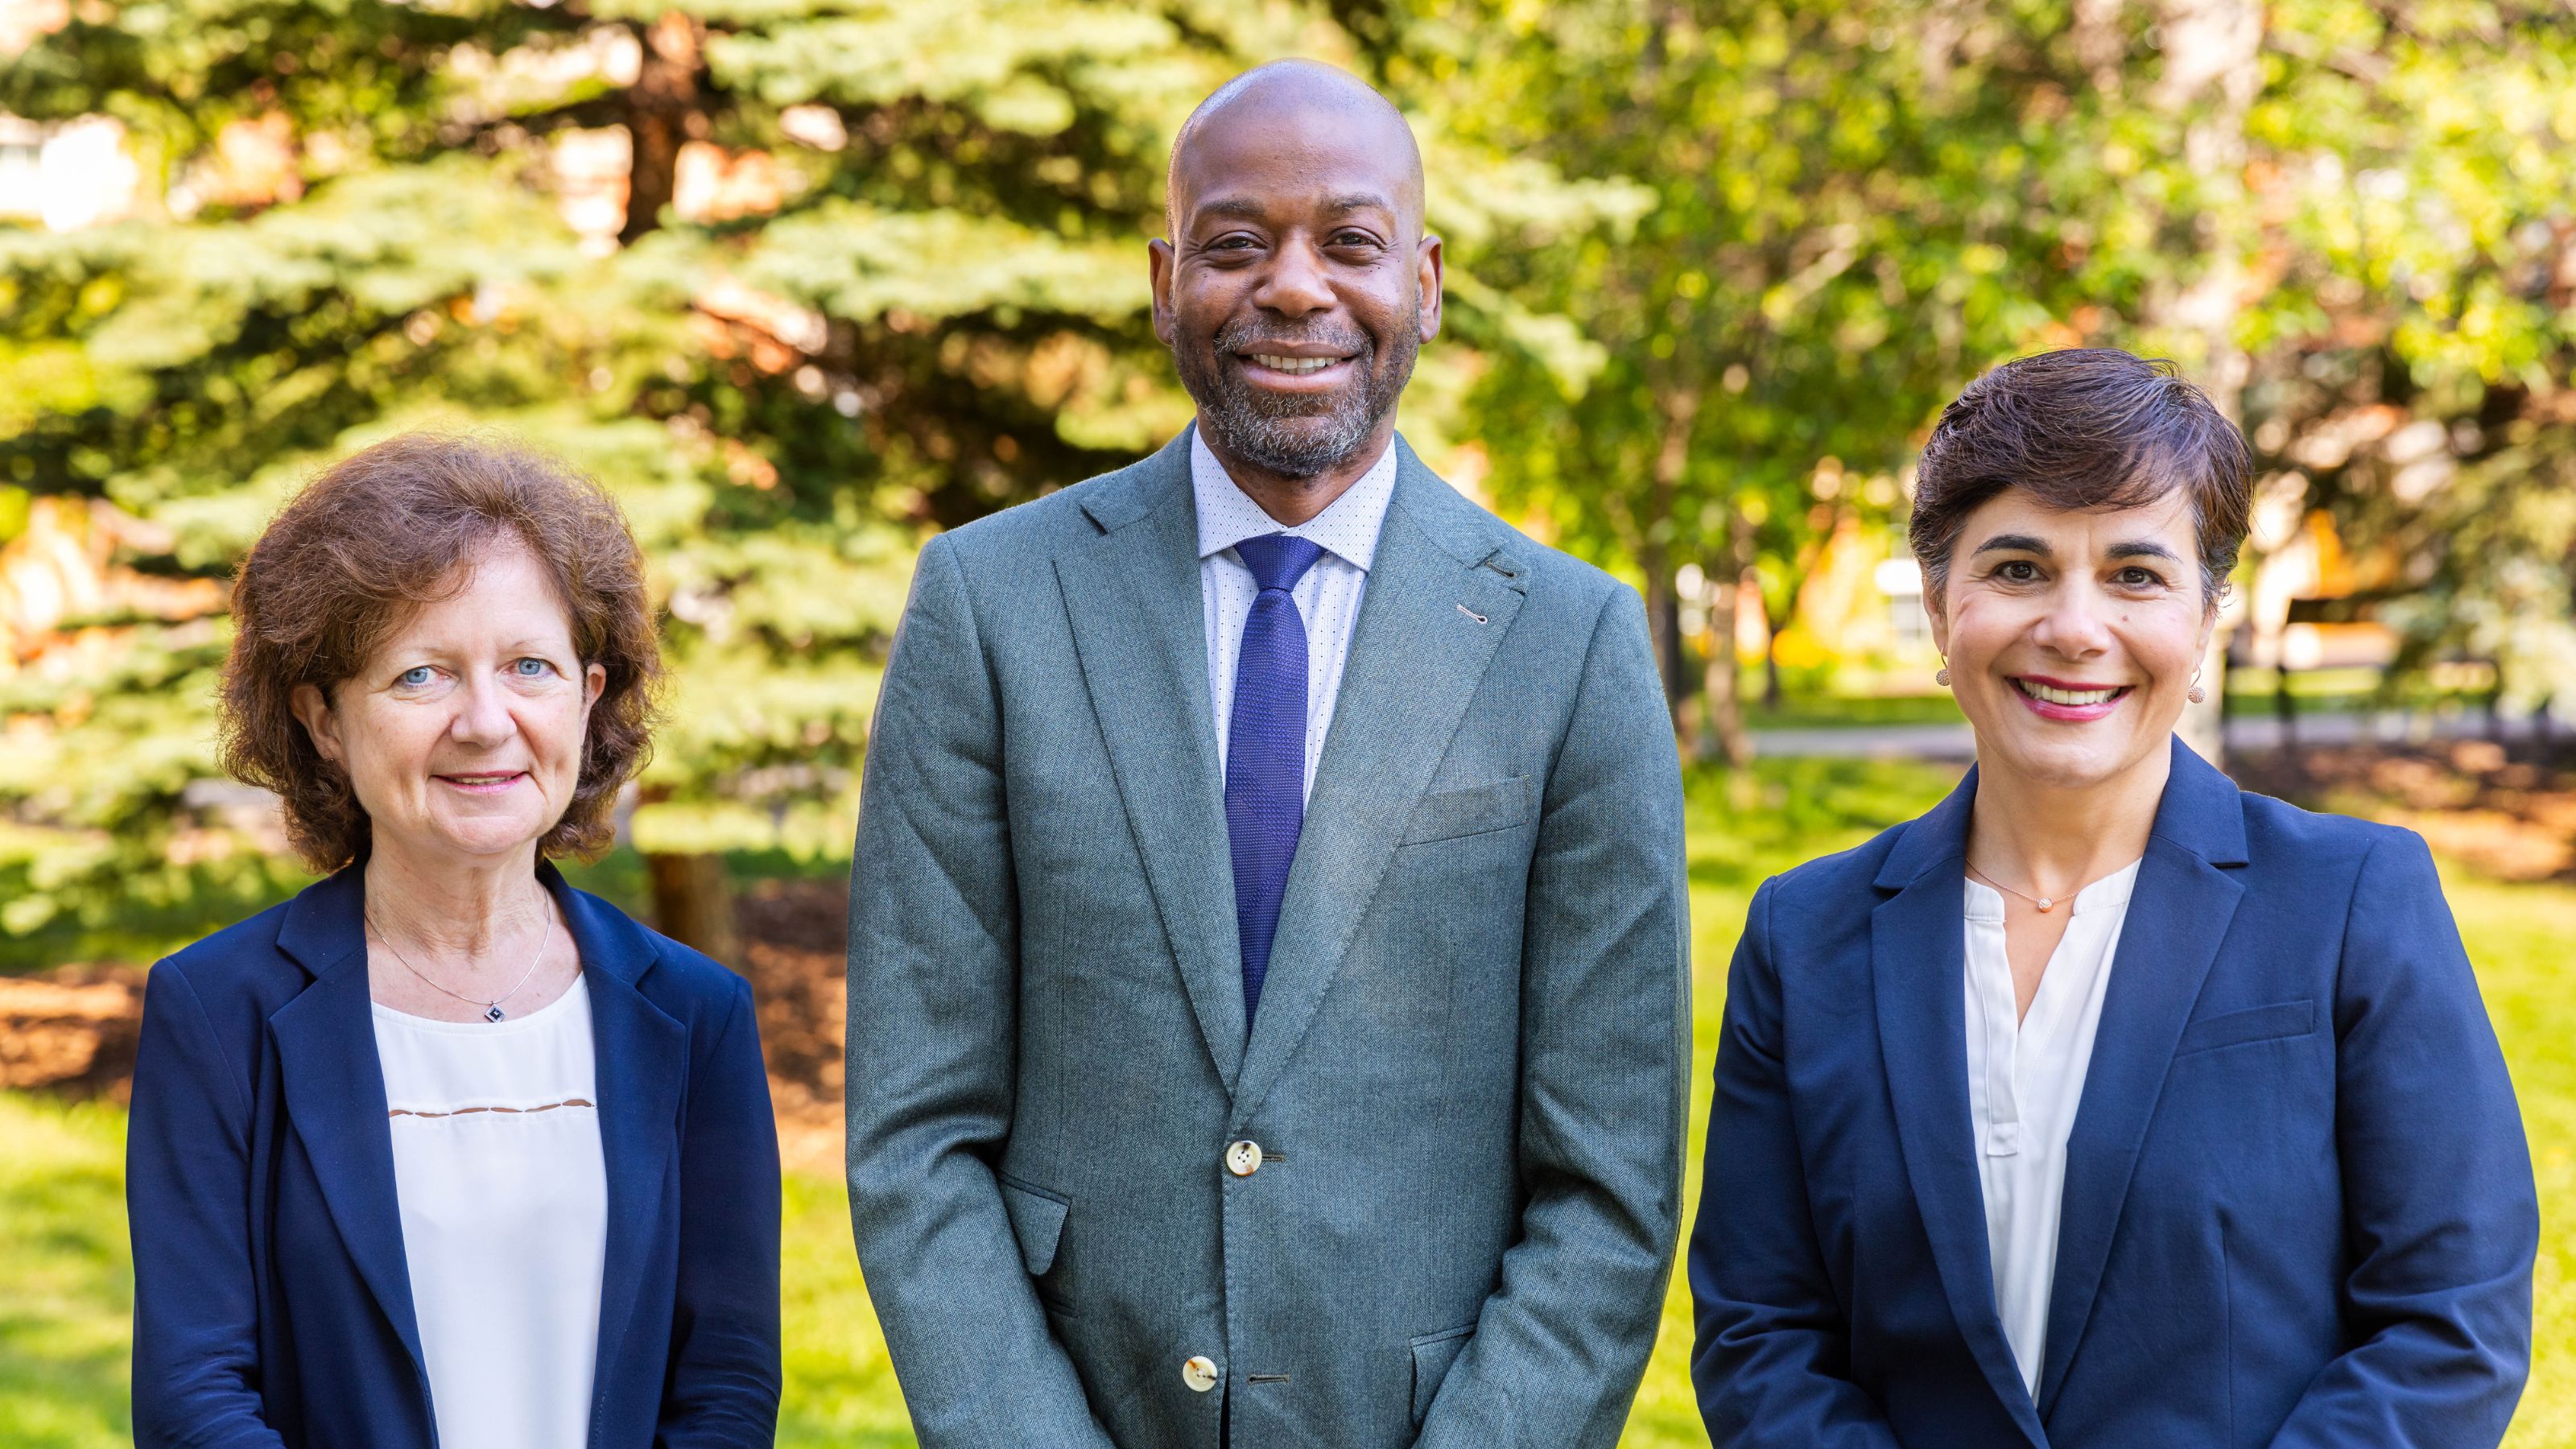 Left to right: Brenda Hemmelgarn, College Dean and Vice-Provost, College of Health Sciences, Marvin Washington, College Dean and Vice-Provost, College of Social Sciences and Humanities and Matina Kalcounis-Rueppell, College Dean and Vice-Provost, College of Natural and Applied Sciences at the University of Alberta